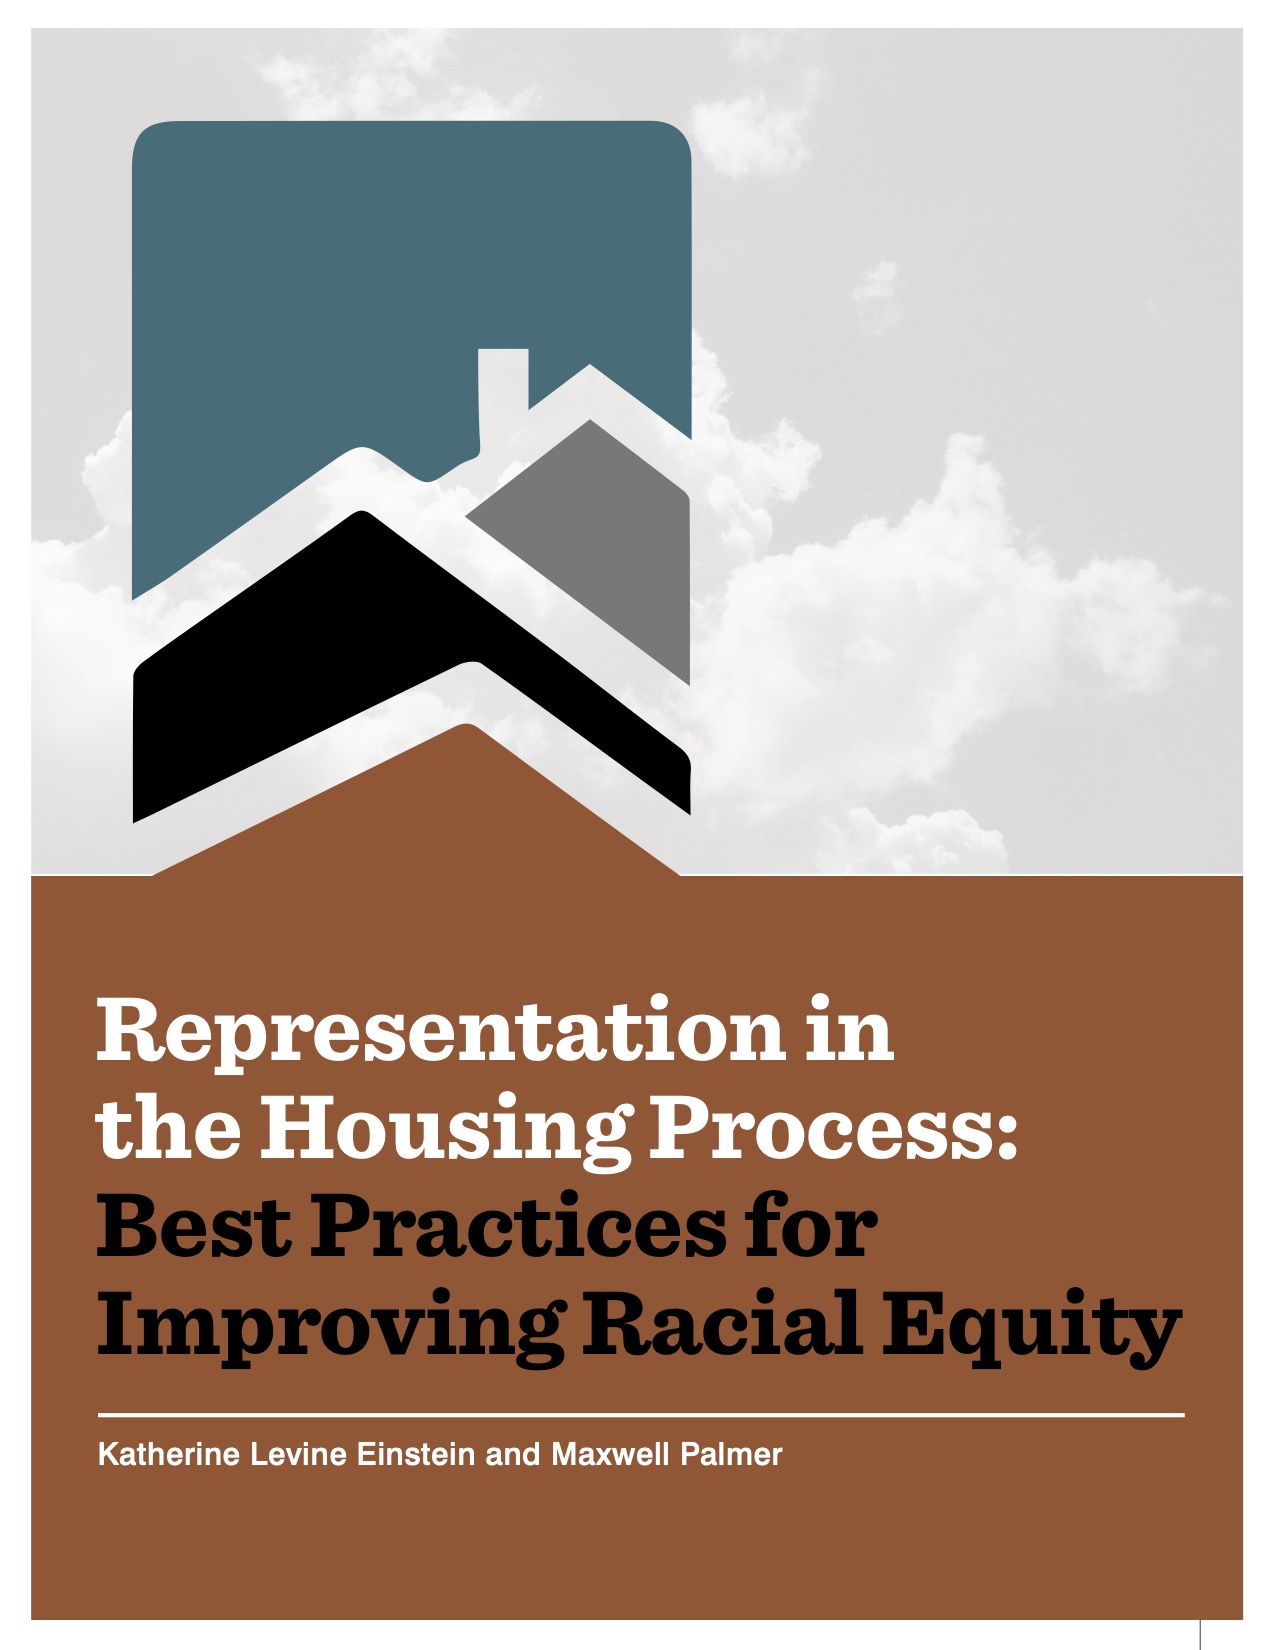 Representation in the Housing Process report cover